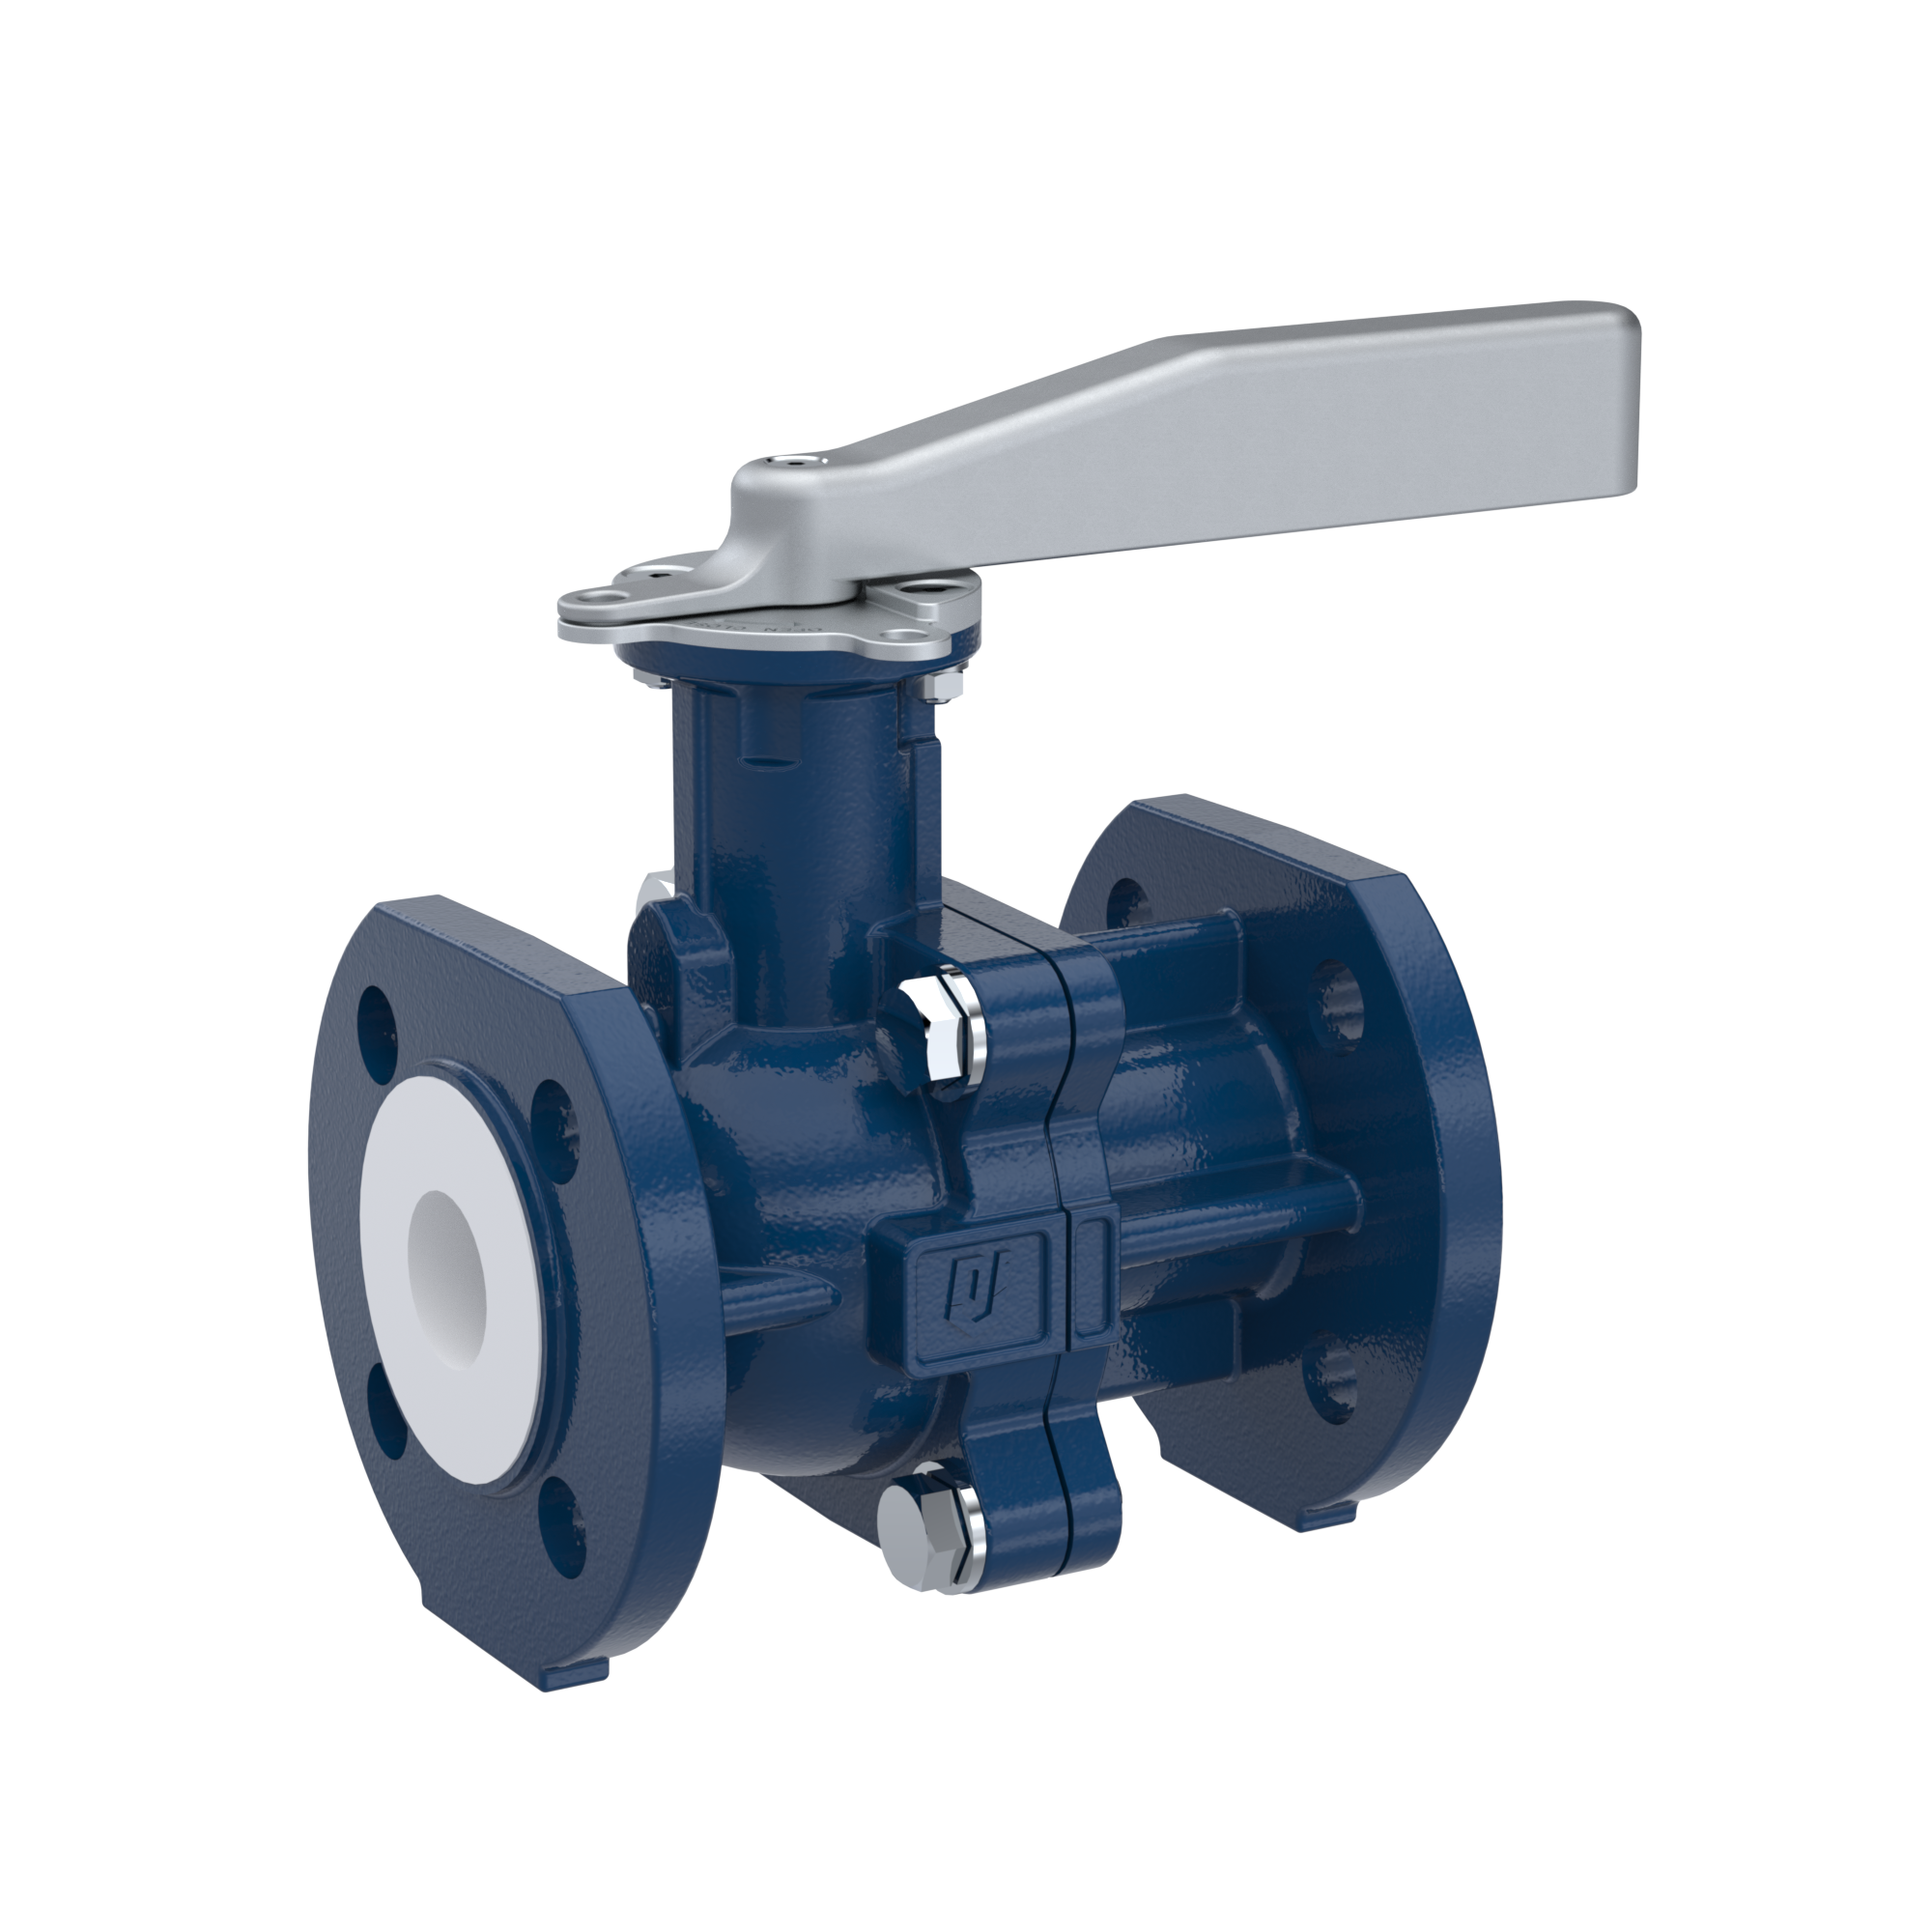 PFA-flange ball valve FK13 DN40 - 1 1/2" inch PN10/16 made of spheroidal graphite cast iron with lever hand